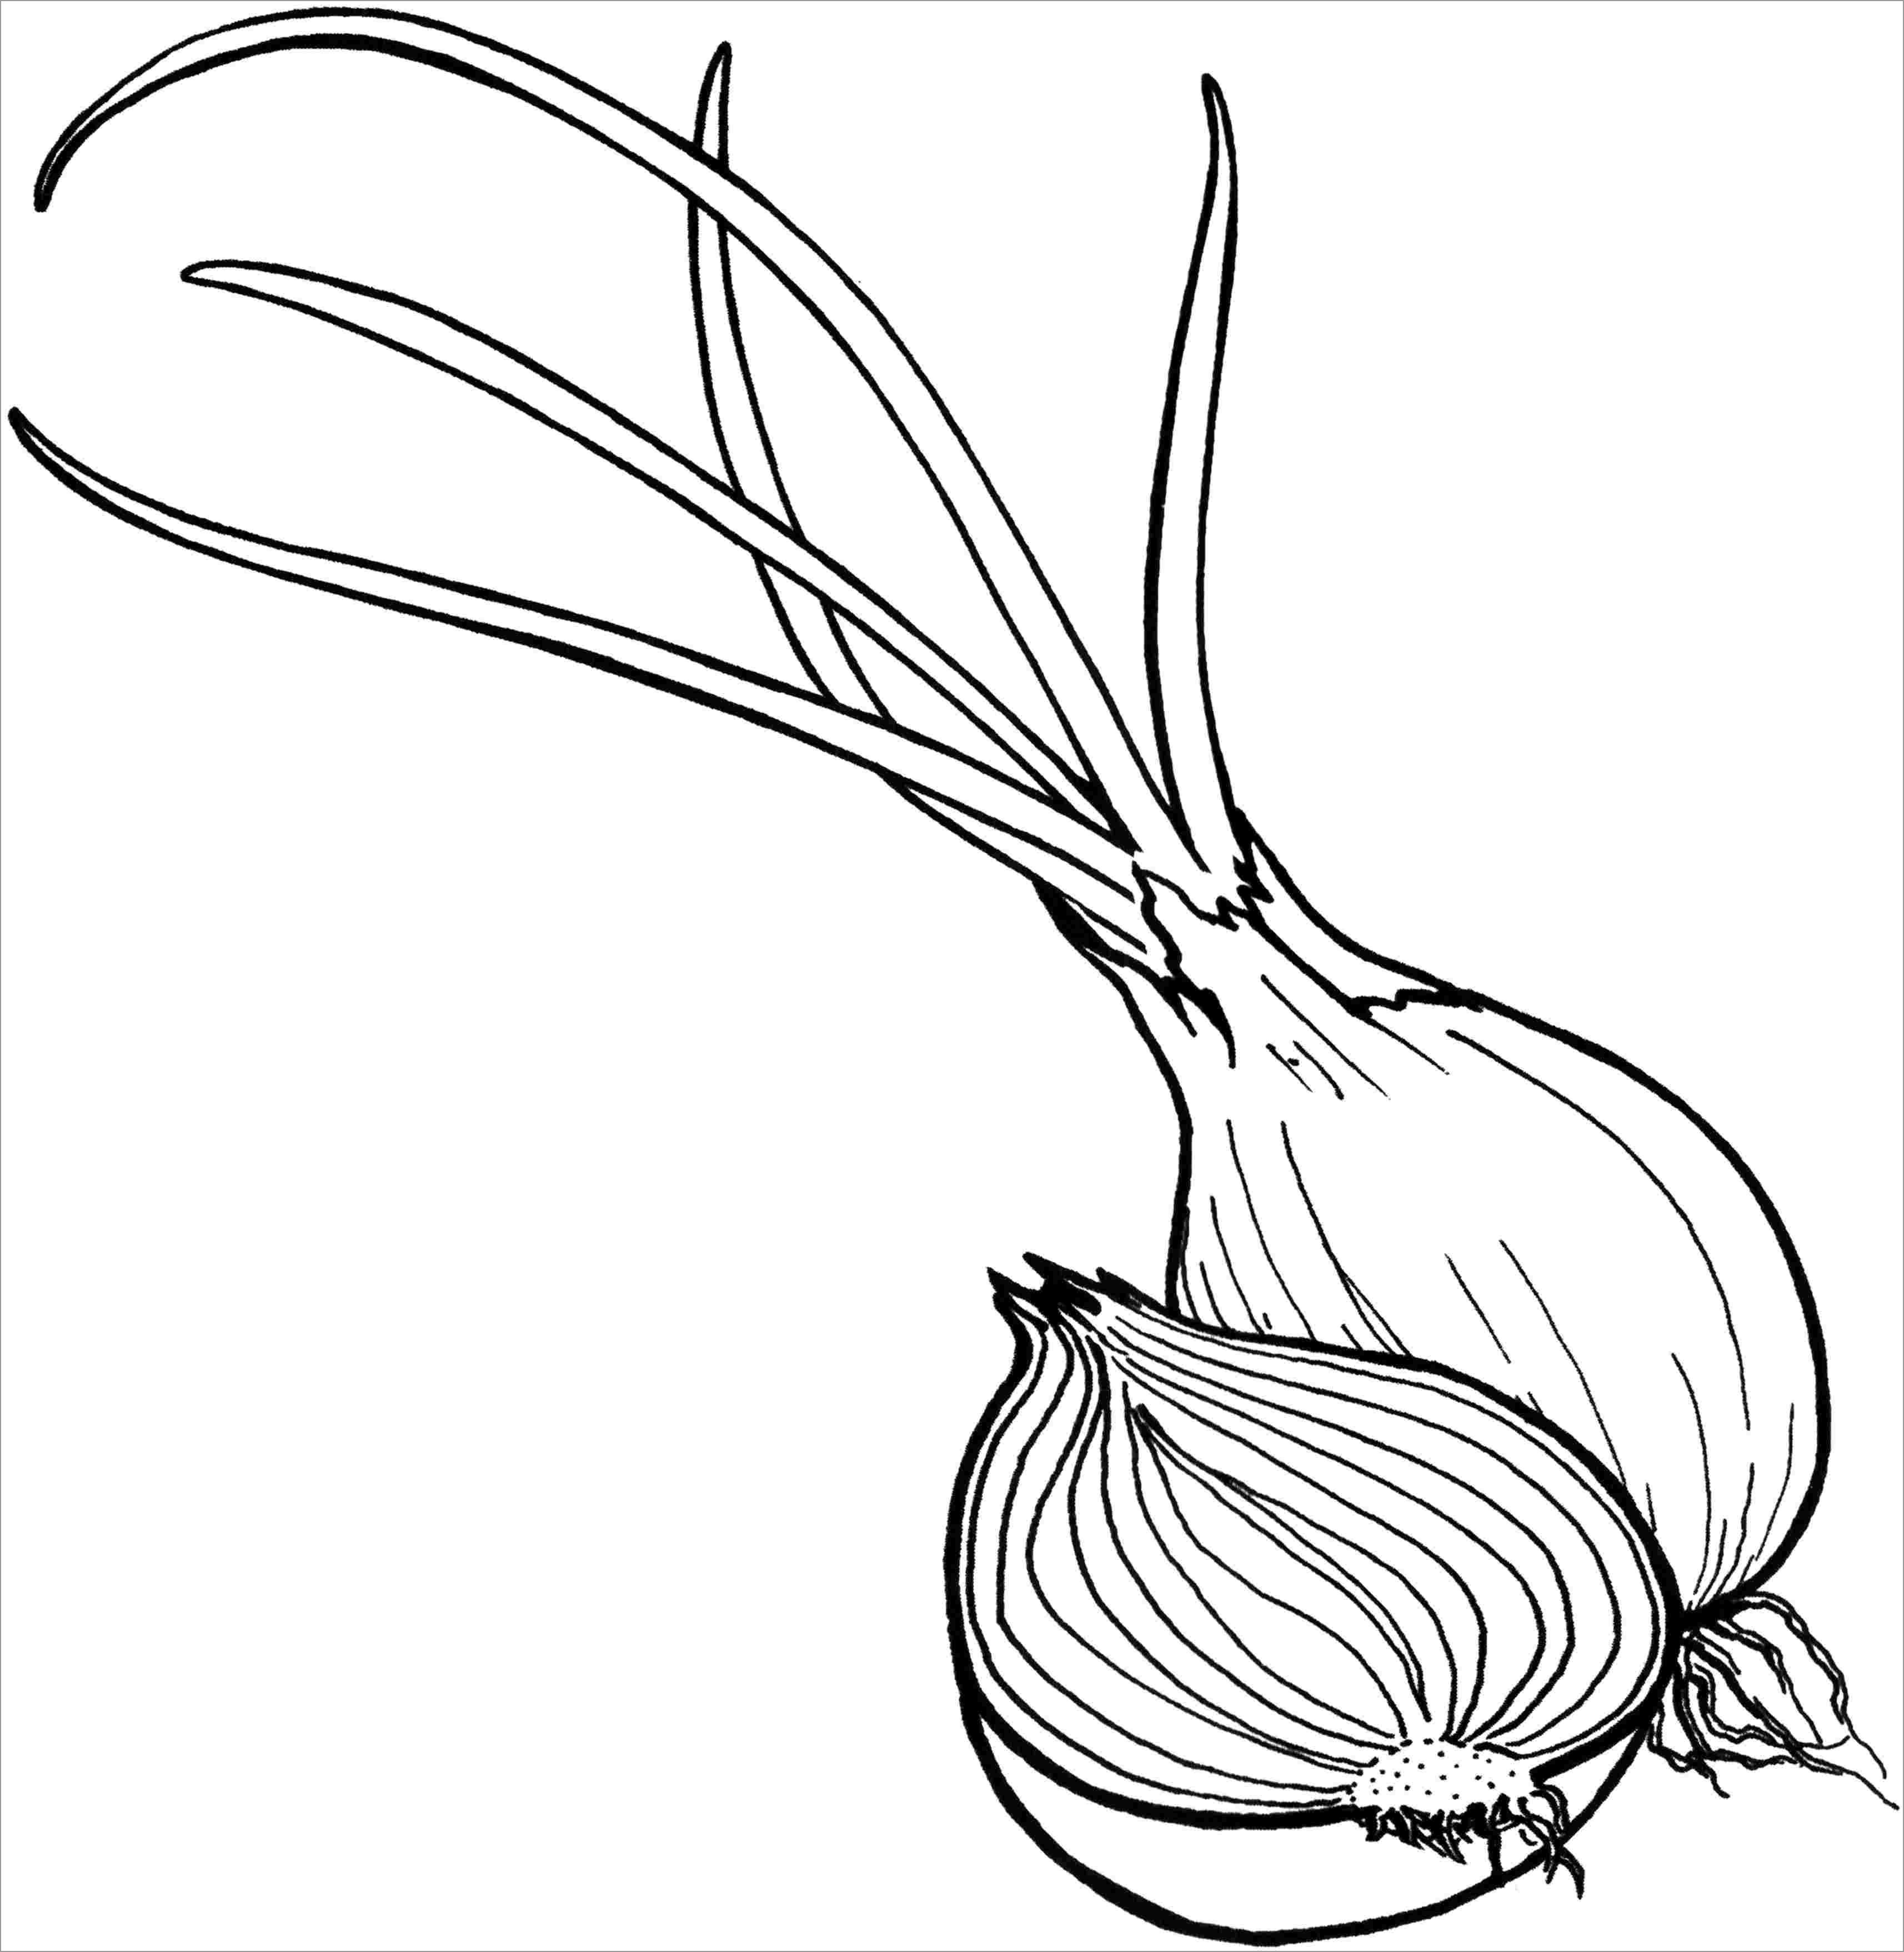 Sliced Onions Coloring Pages for Kids - ColoringBay